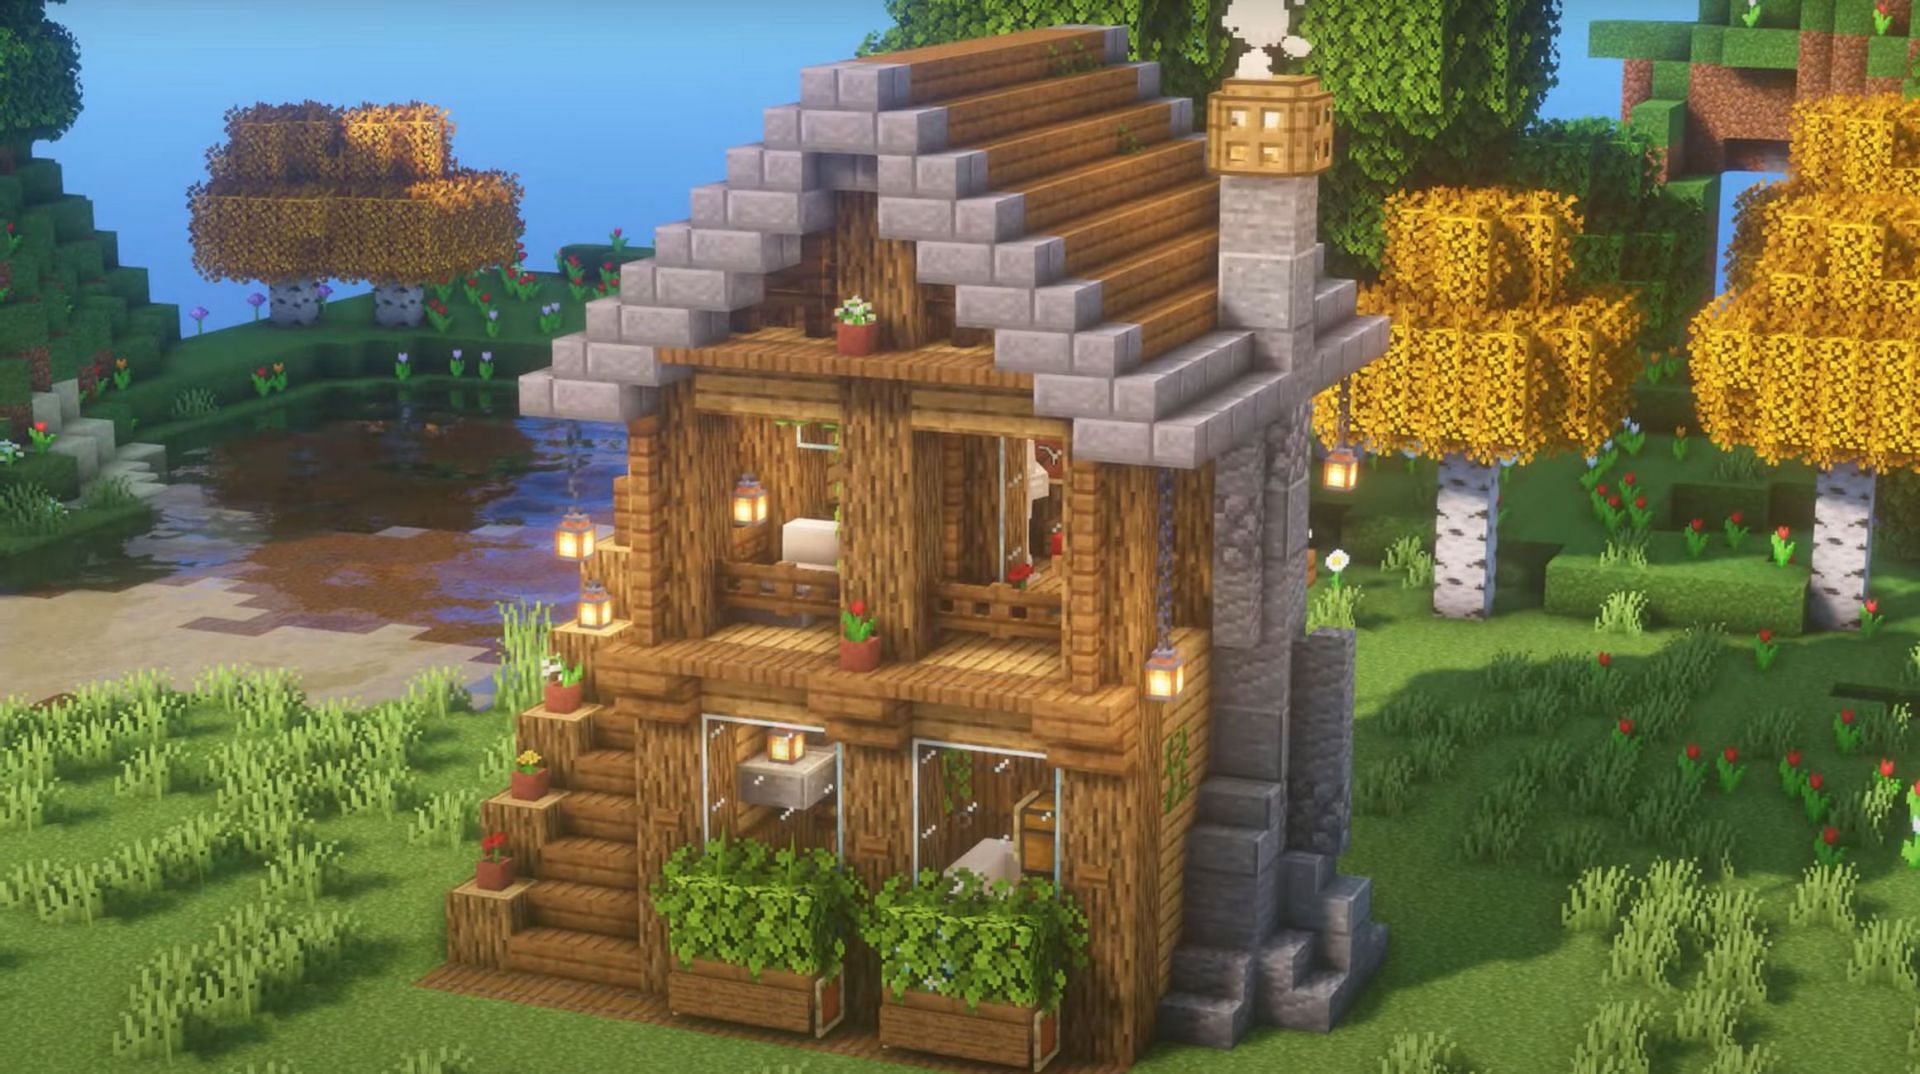 This cottage is a quick build but may require a little building nuance to complete perfectly (Image via PlatinumThief)